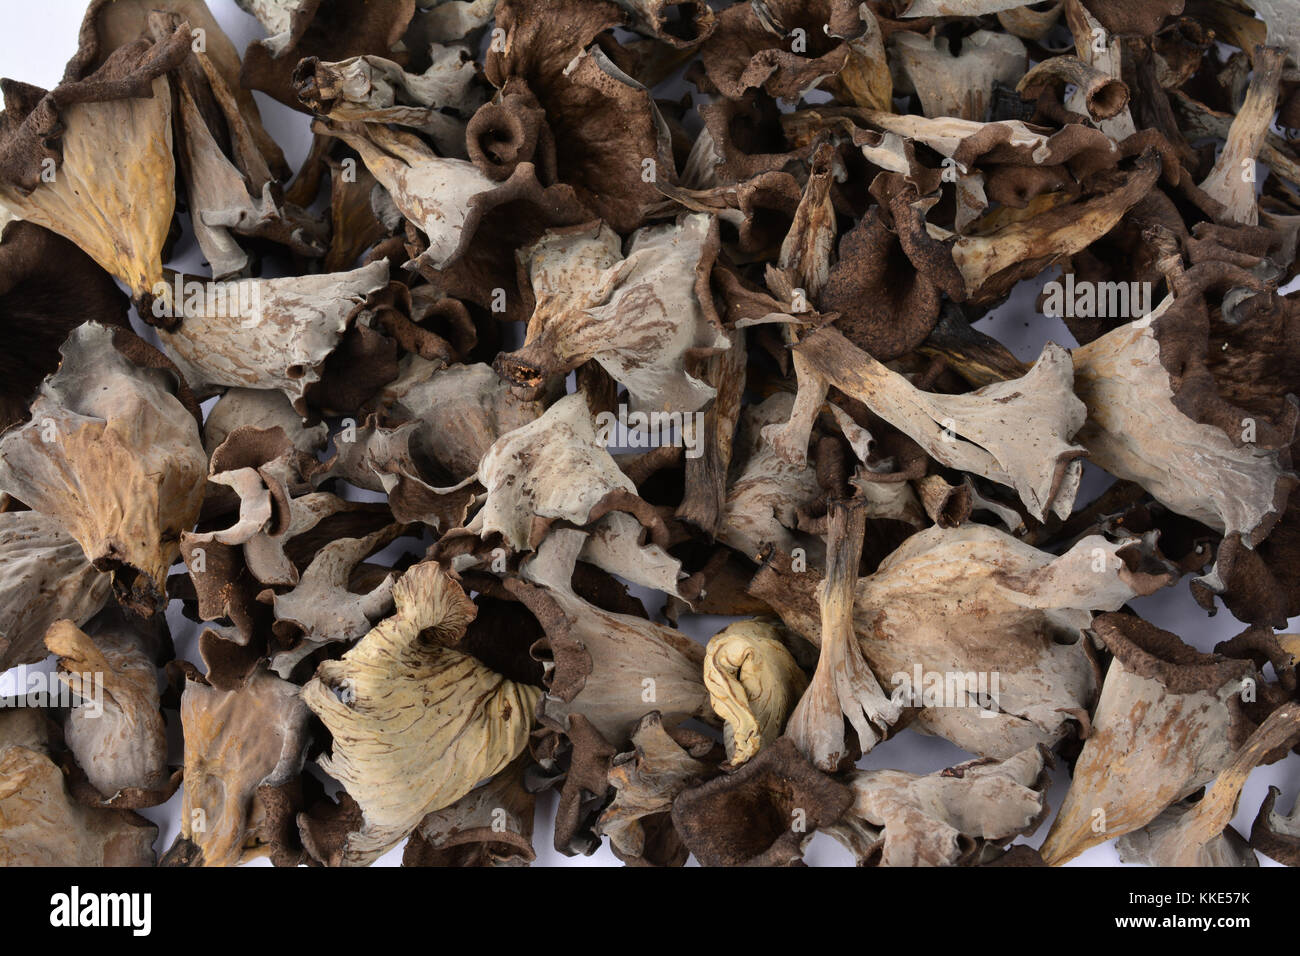 Full frame of delicious edible Horn of Plenty mushrooms or Craterellus cornucopioides, view from above Stock Photo